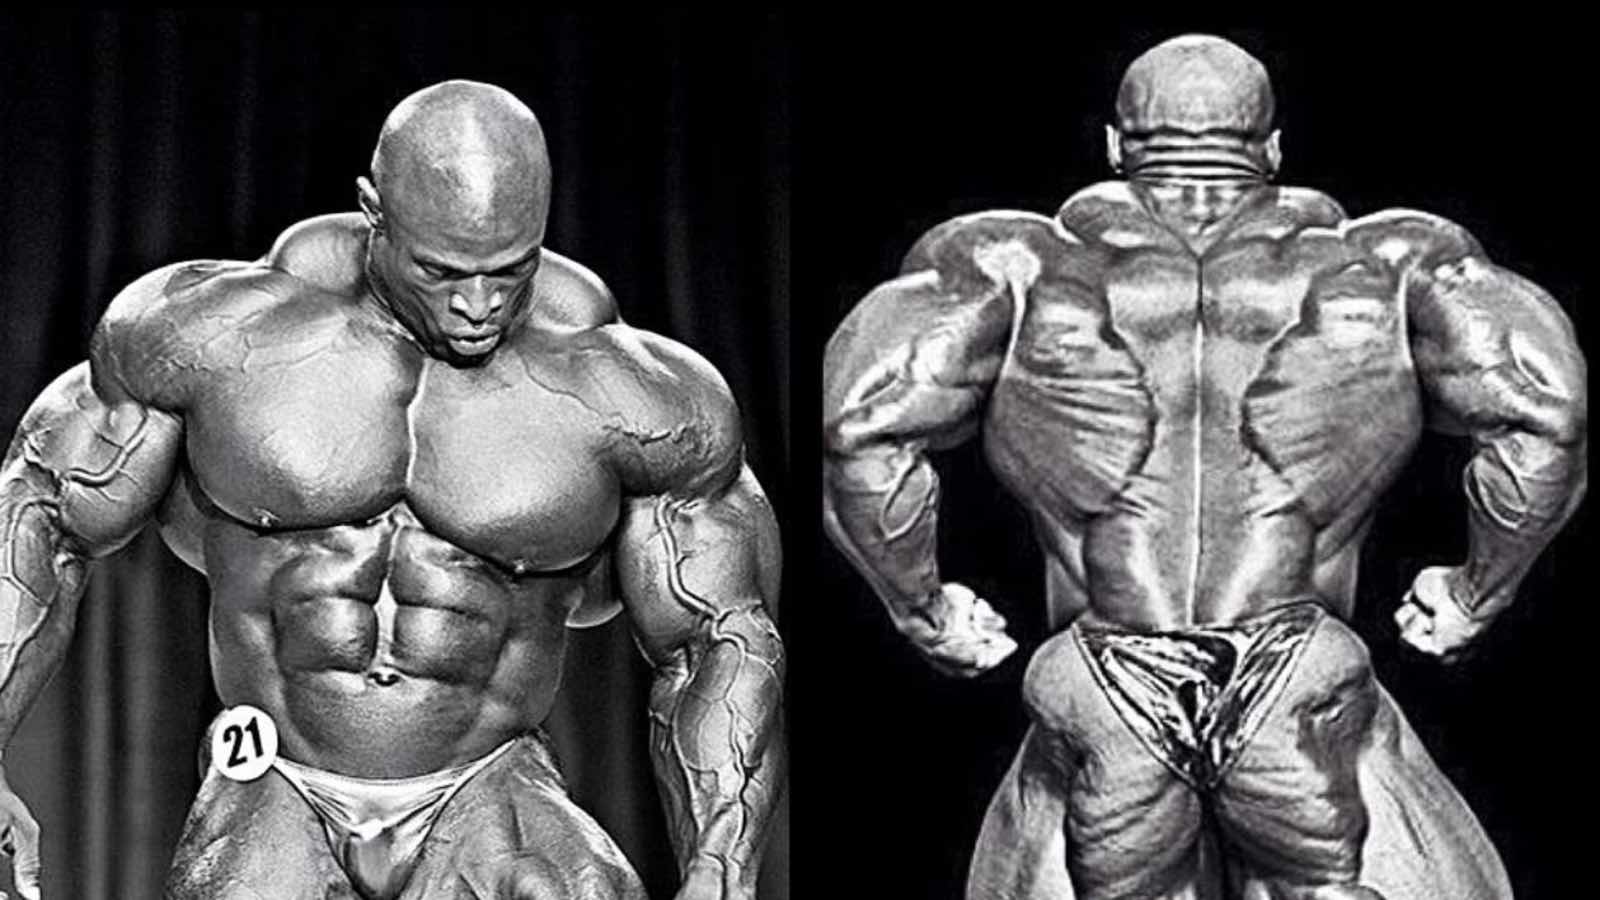 From Jay Cutler to Ronnie Coleman: The Greatest Mr. Olympia Bodybuilding  Winners of All Time